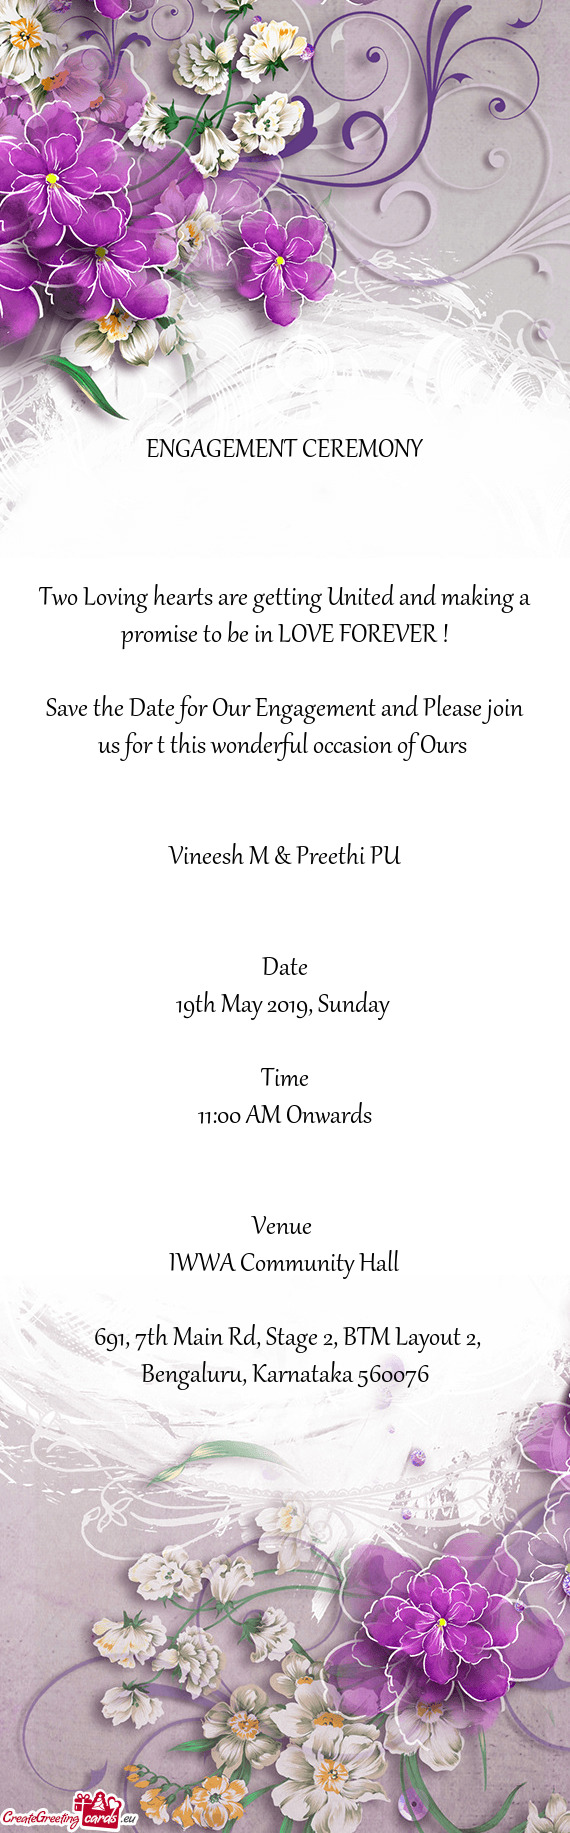 Save the Date for Our Engagement and Please join us for t this wonderful occasion of Ours